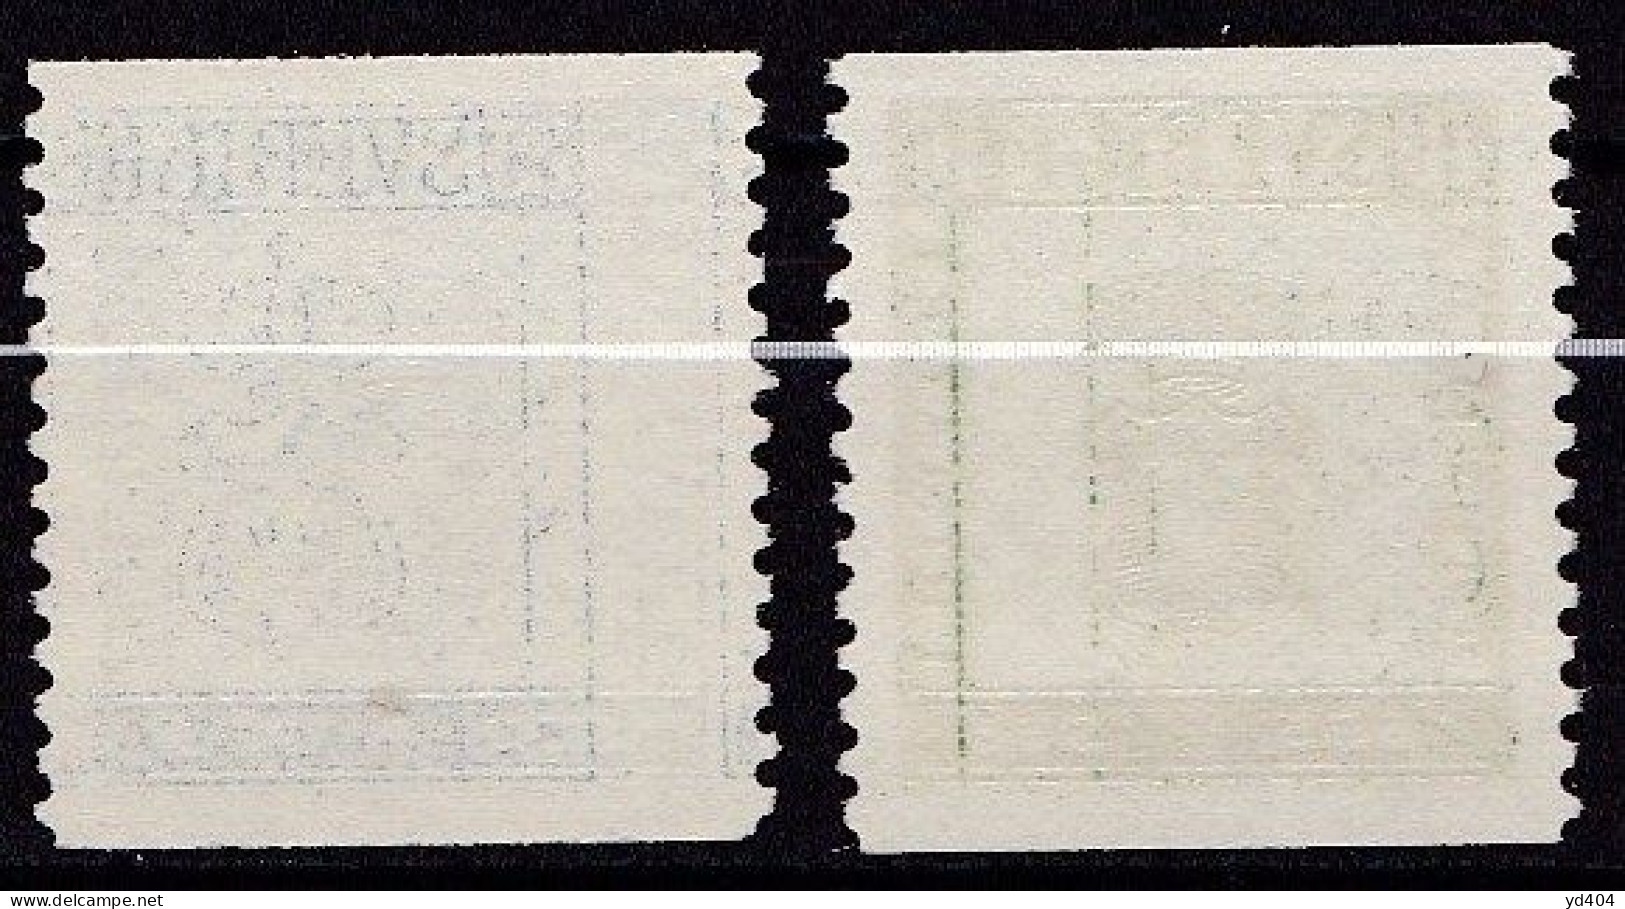 SE432A – SUEDE – SWEDEN – 1955 – FIRST STAMP CENTENARY - Y&T # 395/96 MNH - Unused Stamps